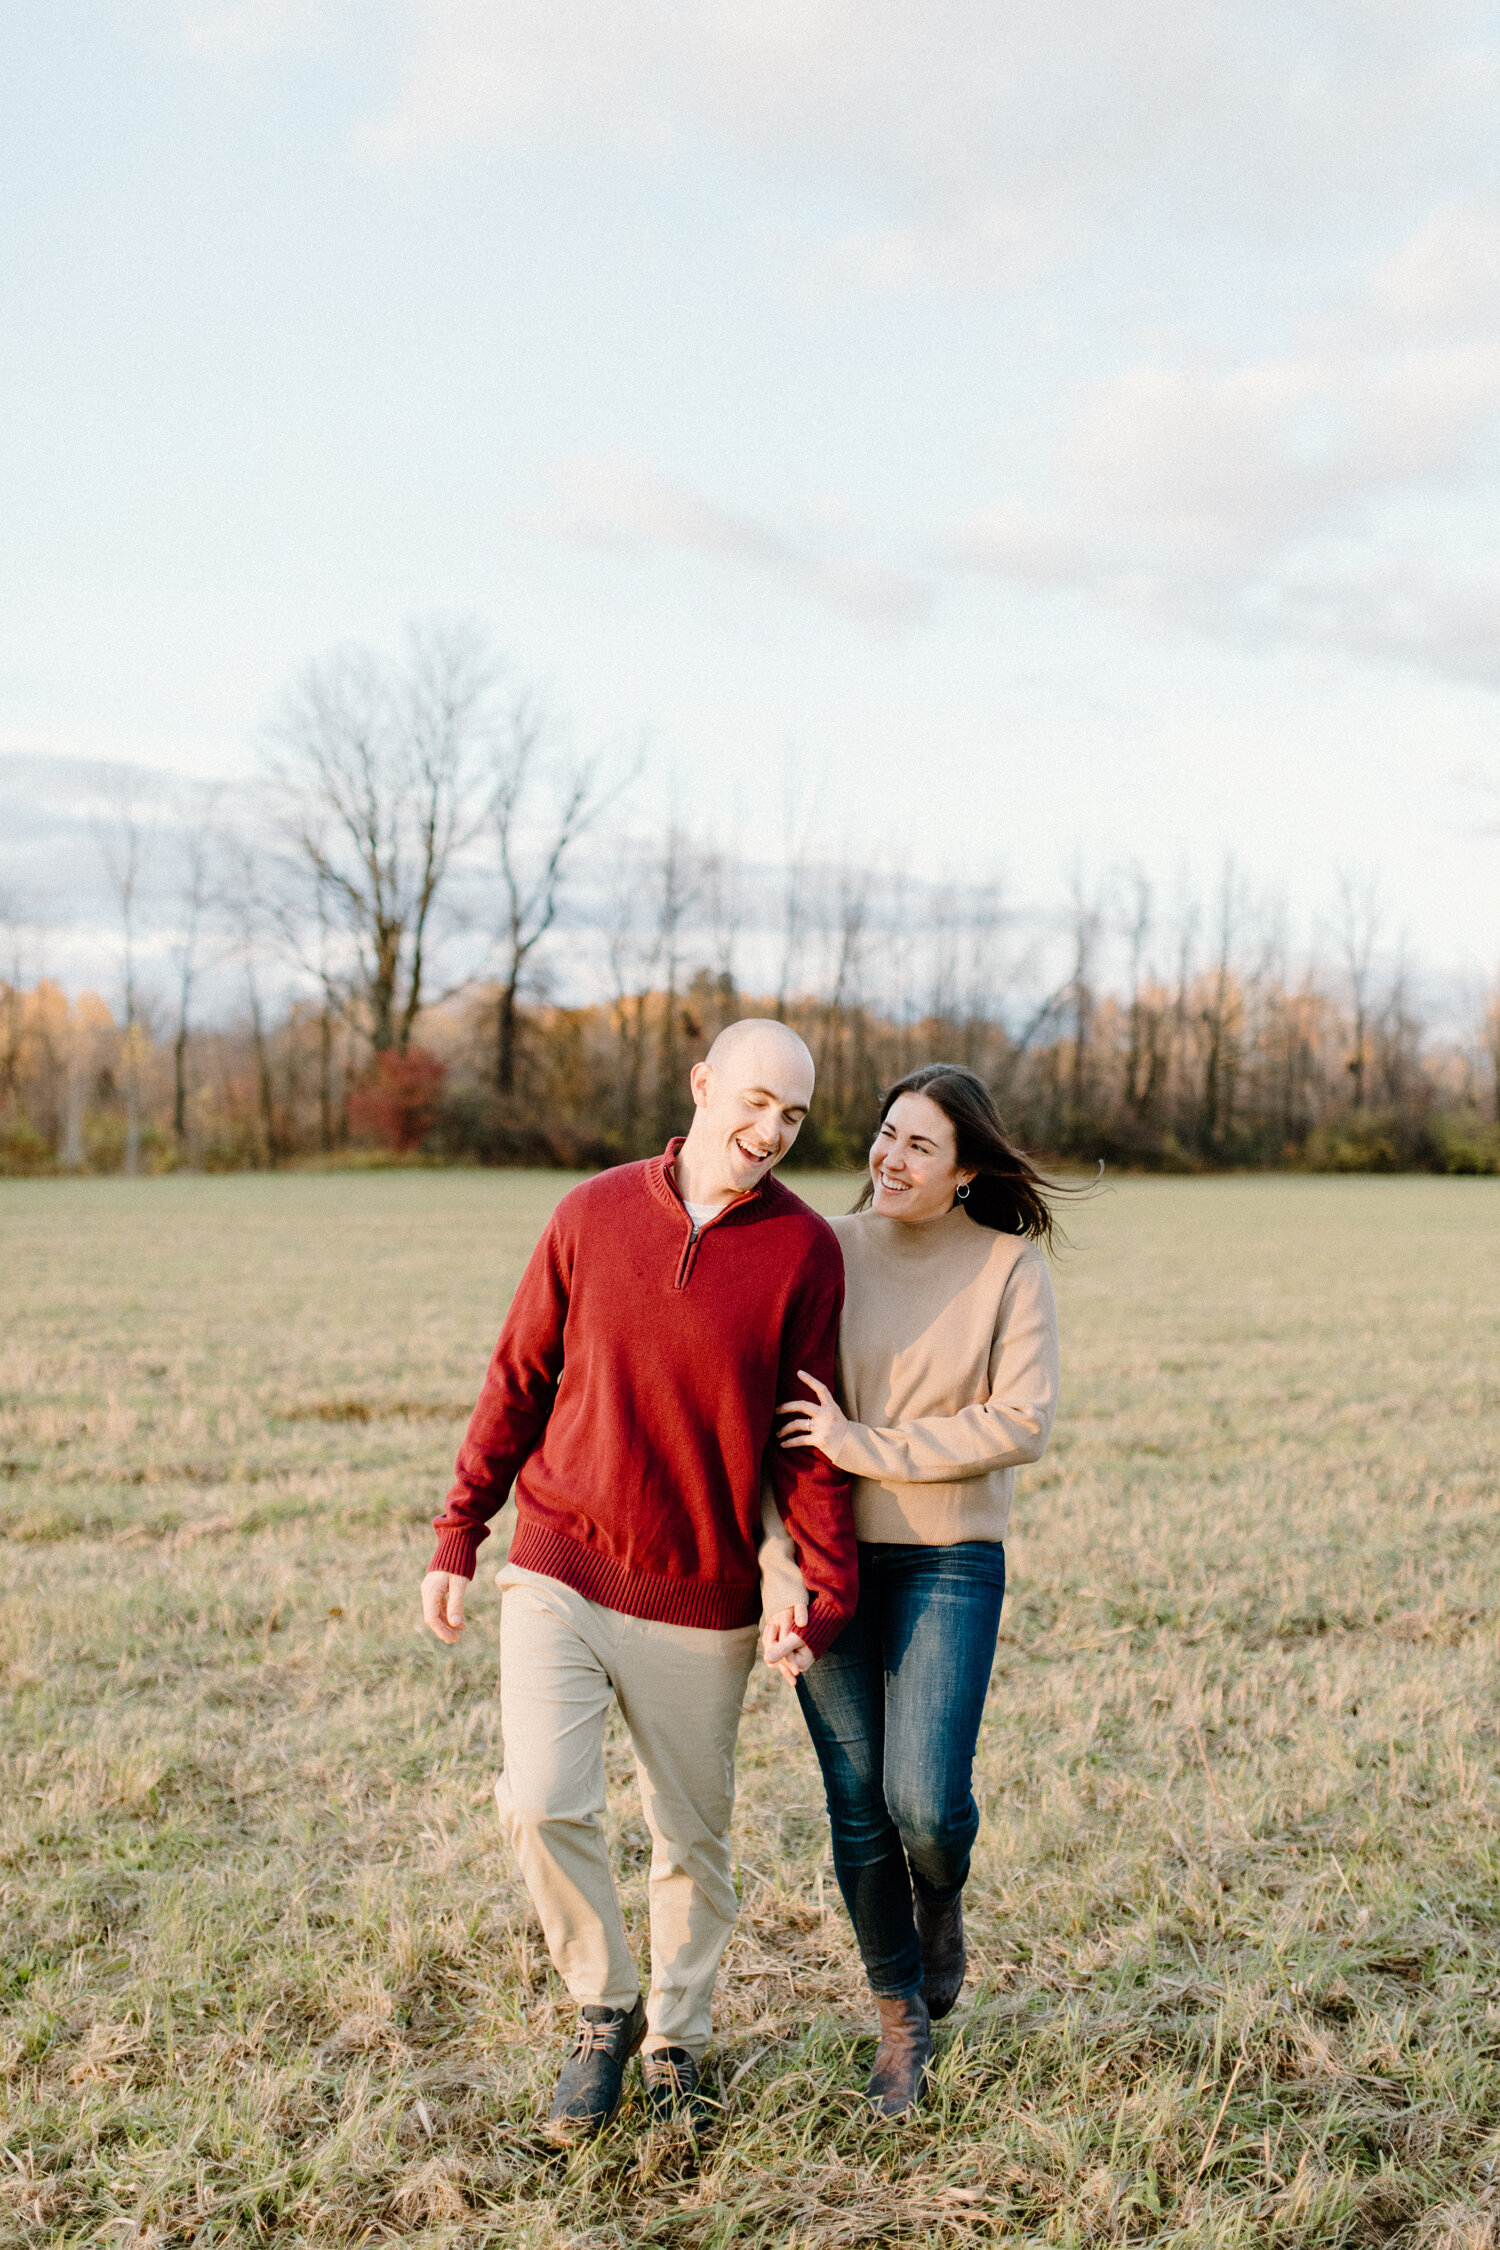  During their autumn engagement session in Ontario, Canada, Chelsea Mason Photography captures this couple linking arms and walking through an open field. autumn engagement session trees, mens red pullover with khaki pants, womens camel colored sweat